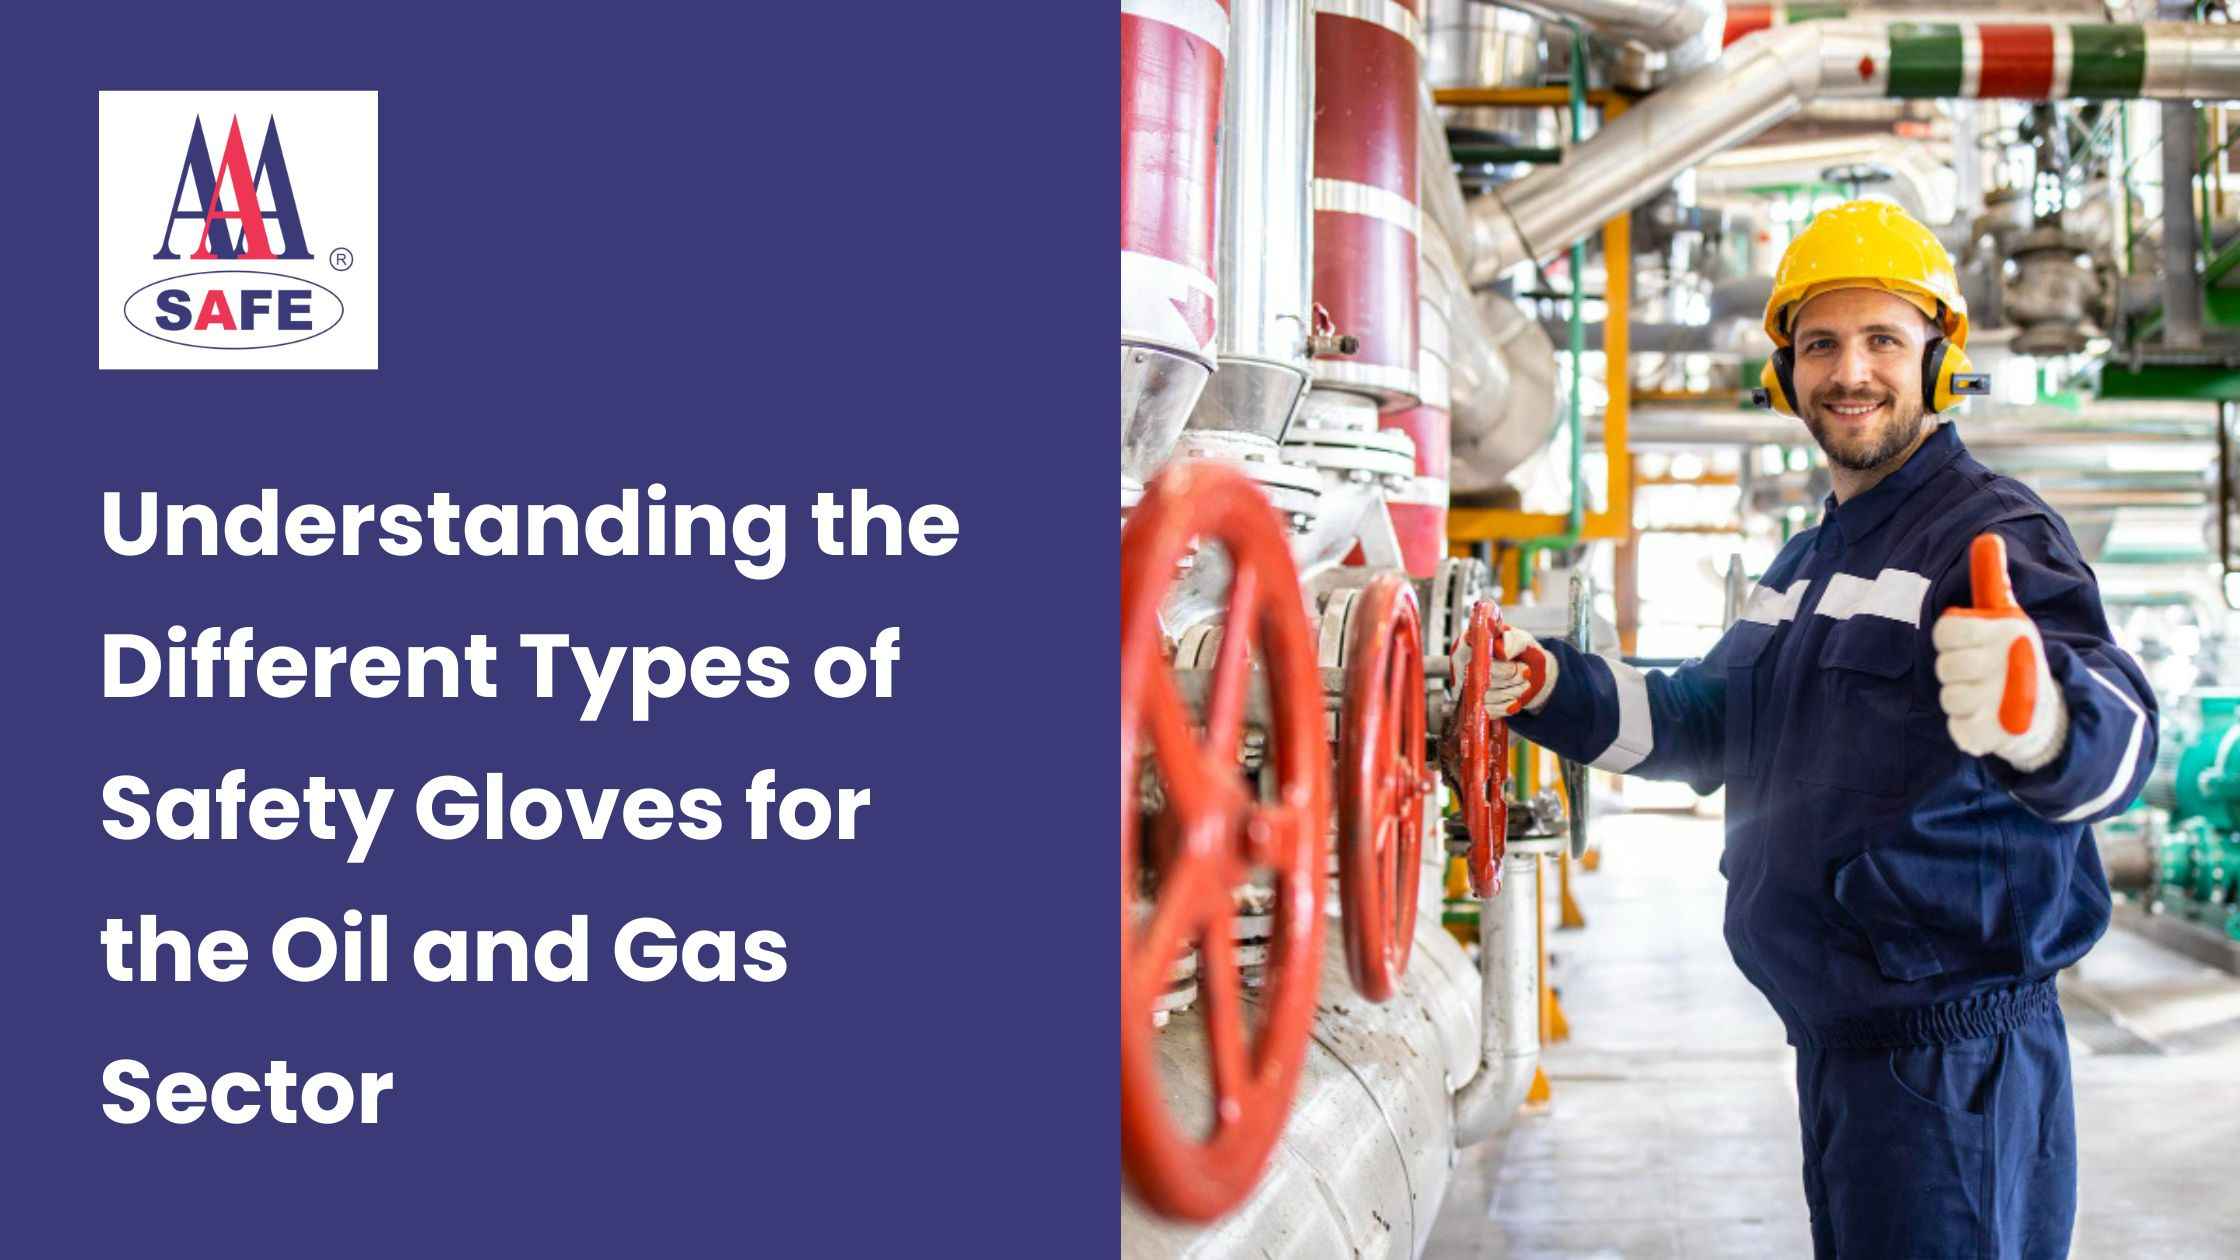 Understanding the Different Types of Safety Gloves for the Oil and Gas Sector